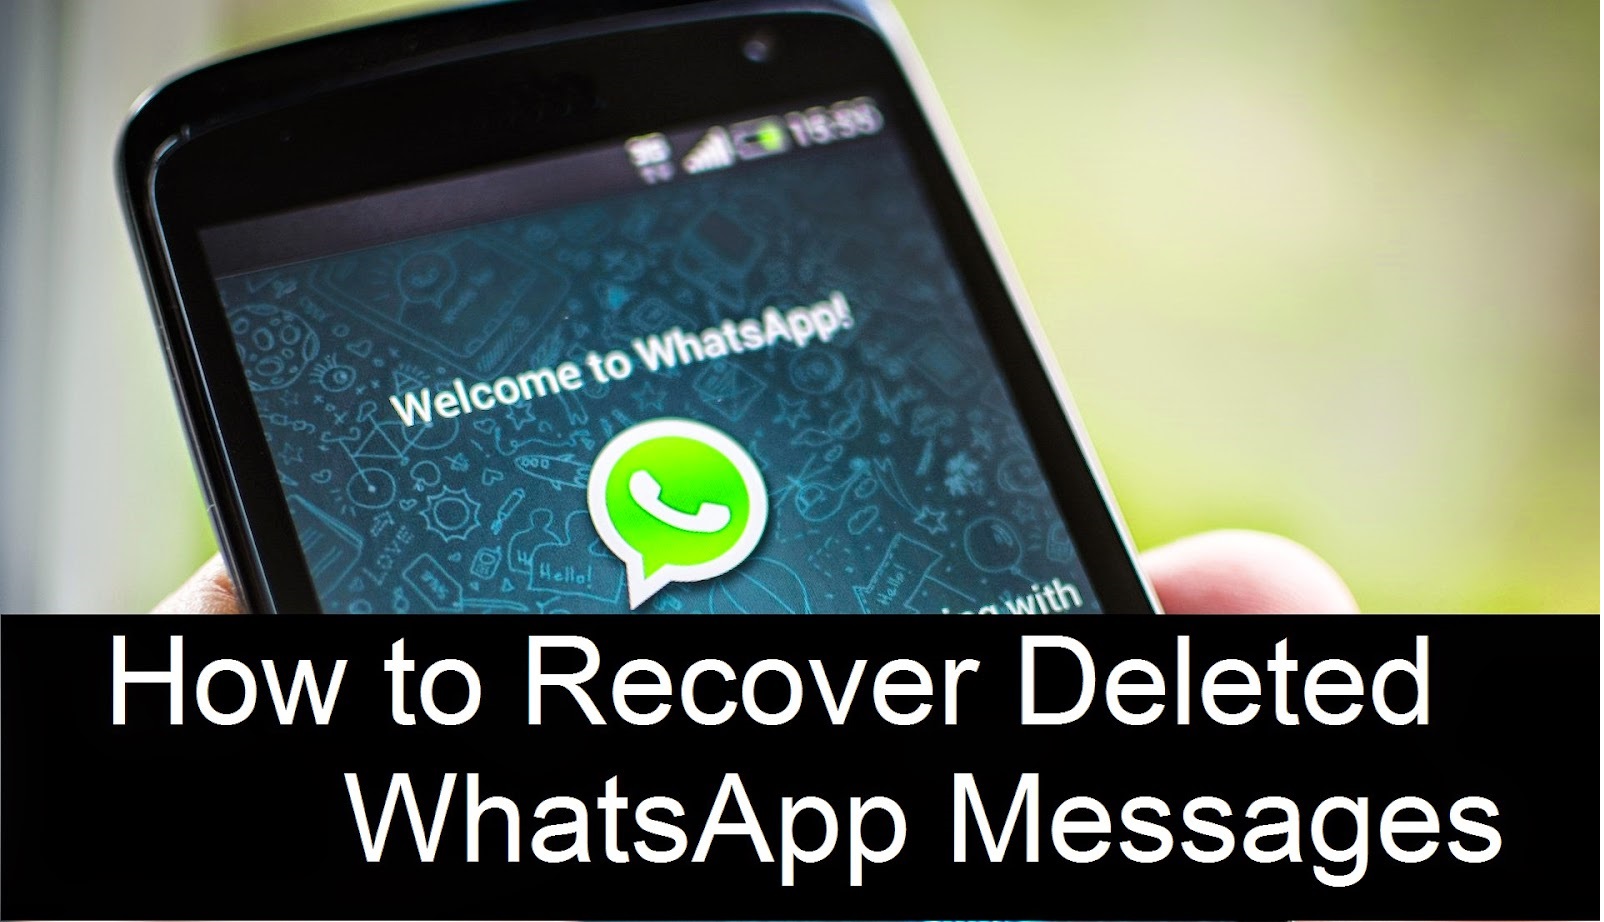 WhatsApp Wonders: Retrieving Deleted Messages on Samsung